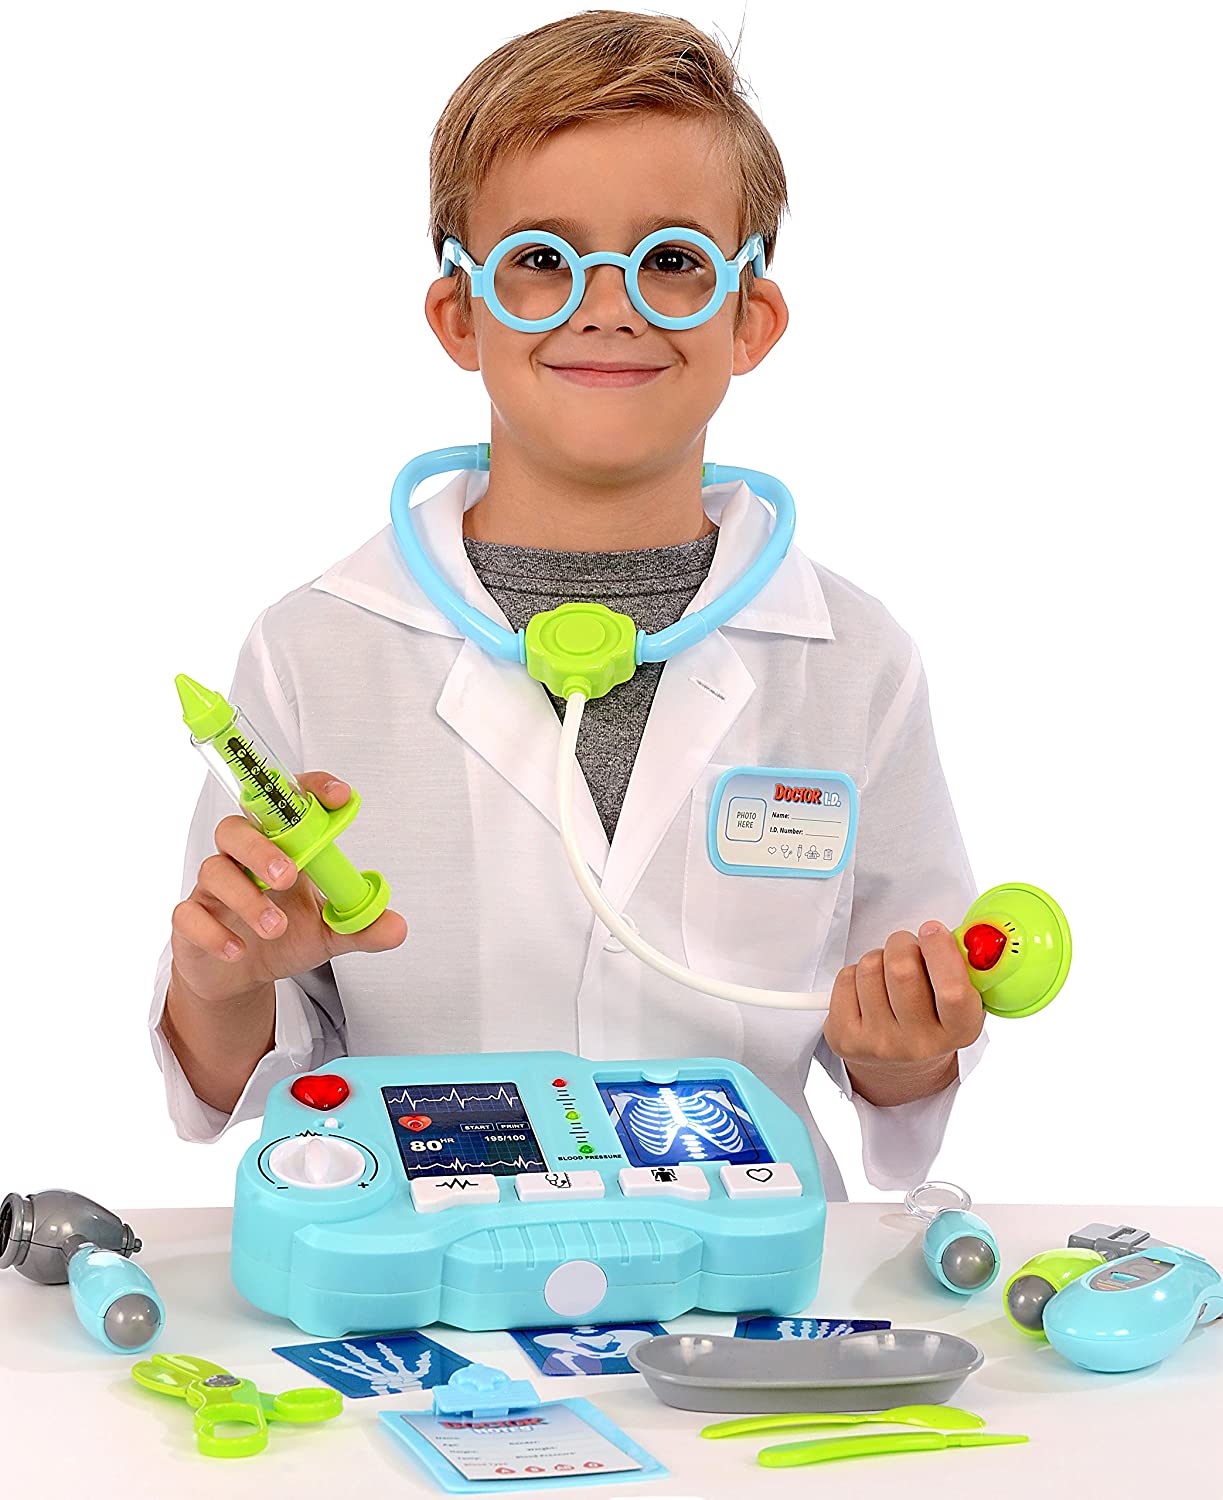 Top 9 Best Toy Doctor Kits Reviews in 2022 6